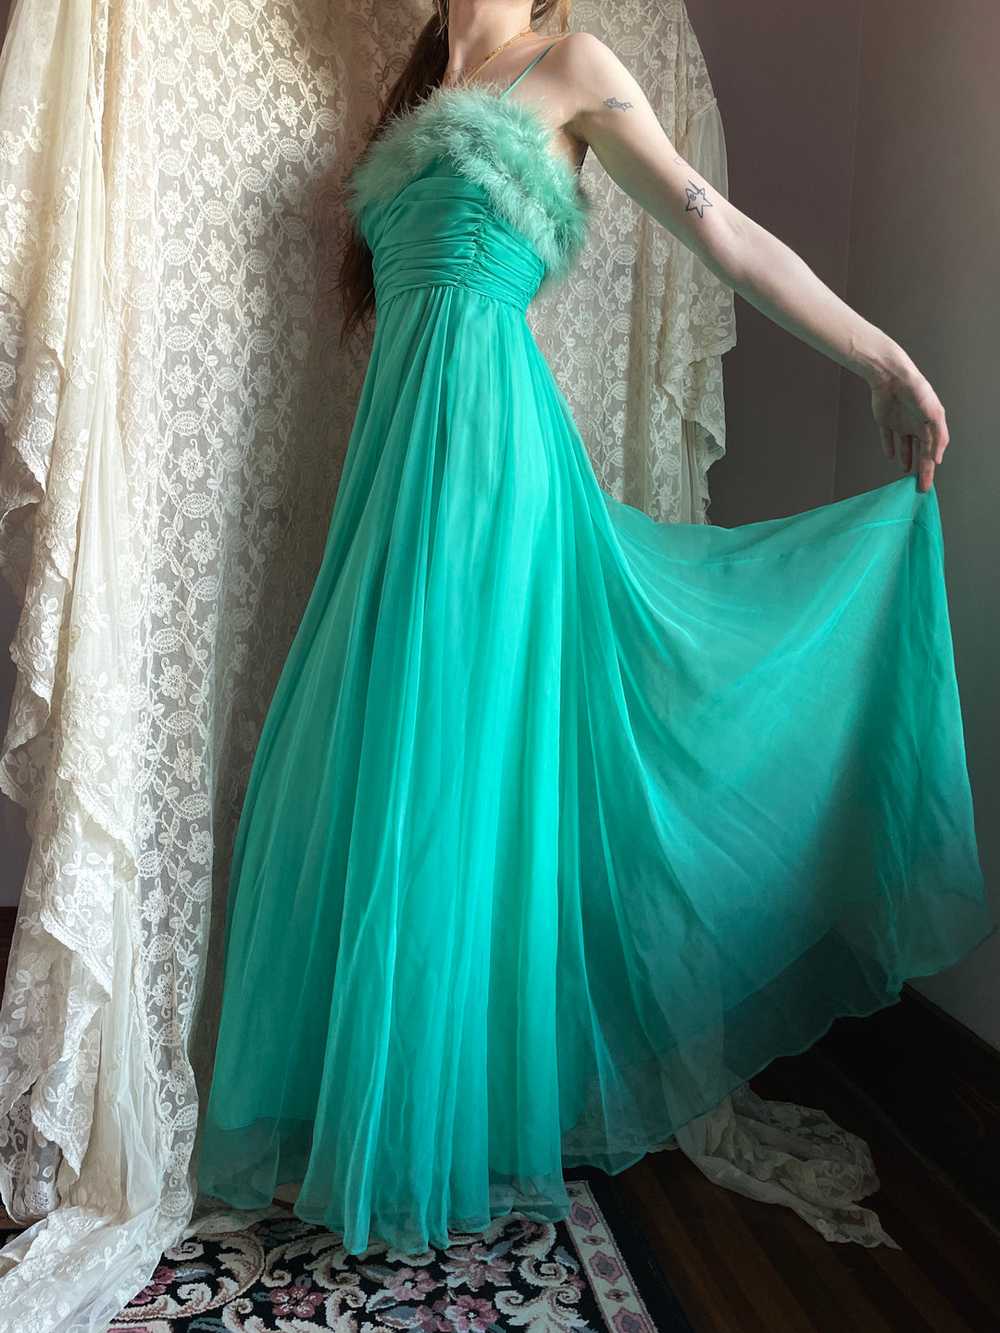 1960s Marabou Feather Green Chiffon Gown Dress - image 10